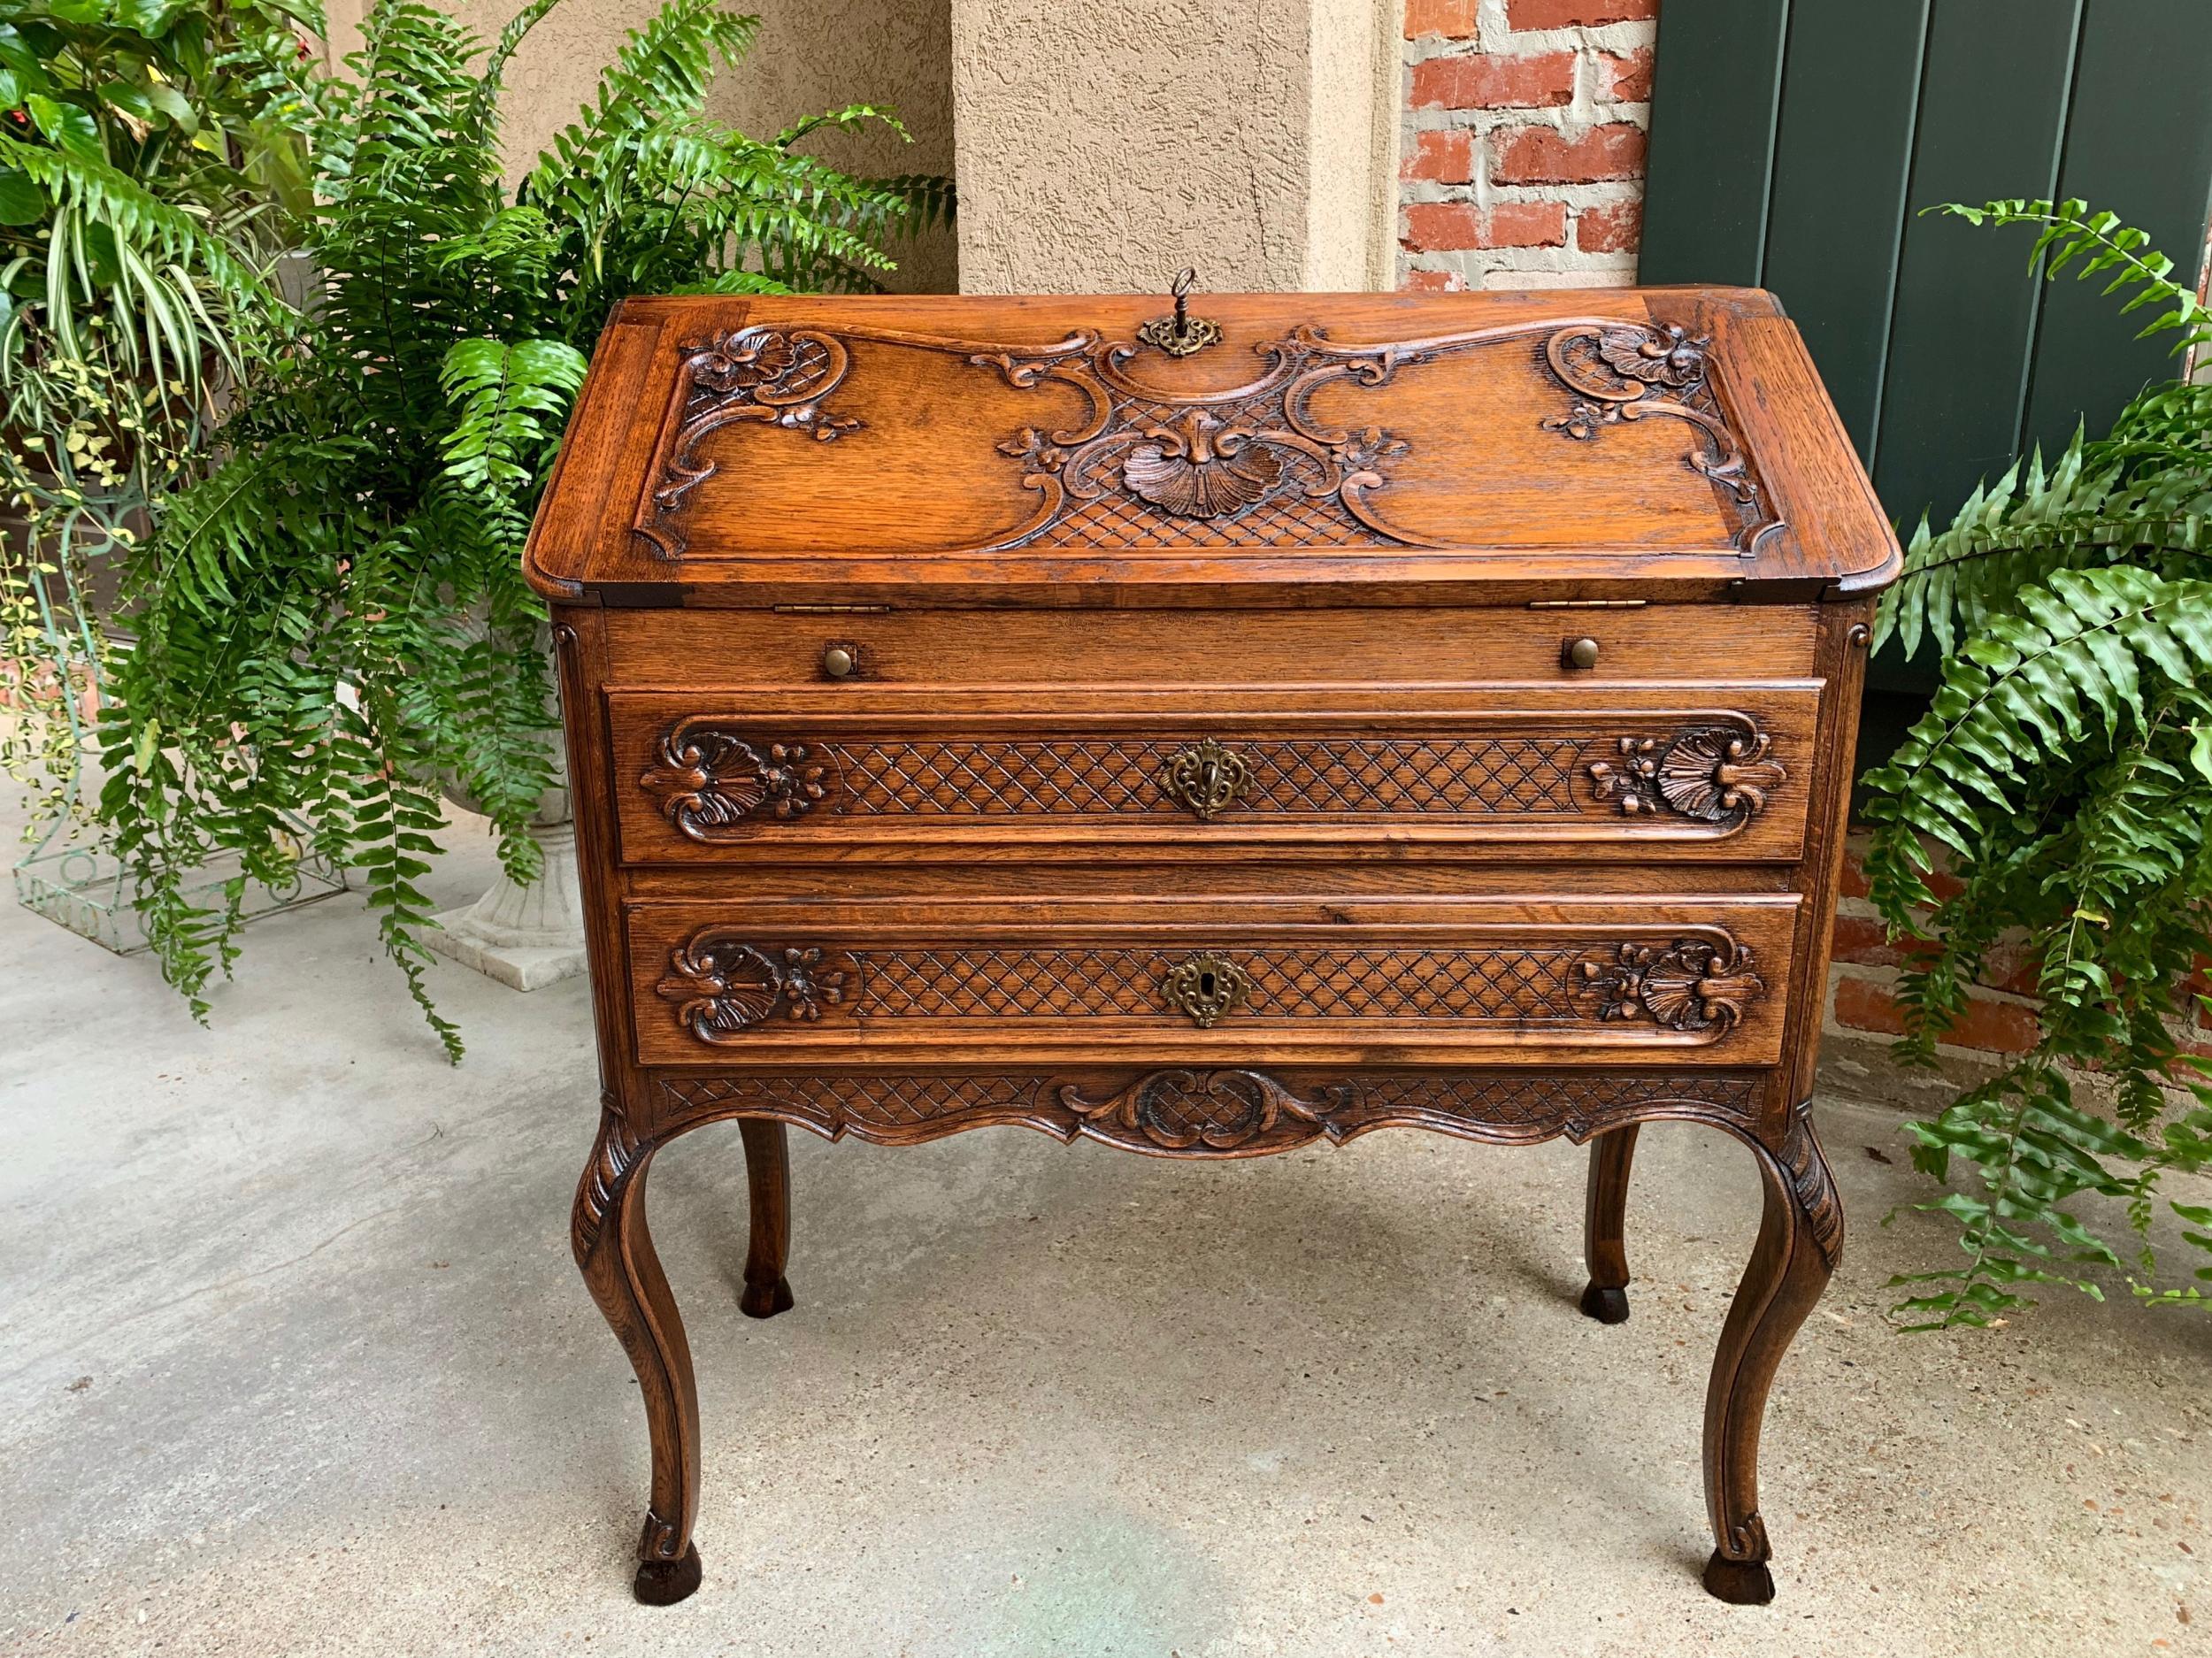 Antique French carved oak secretary desk bureau drop front Louis XV style

~Direct from France~
~A lovely antique French carved “drop front” secretary/desk with quintessential French style from top to bottom!~
~Carved oak French “drop front” or